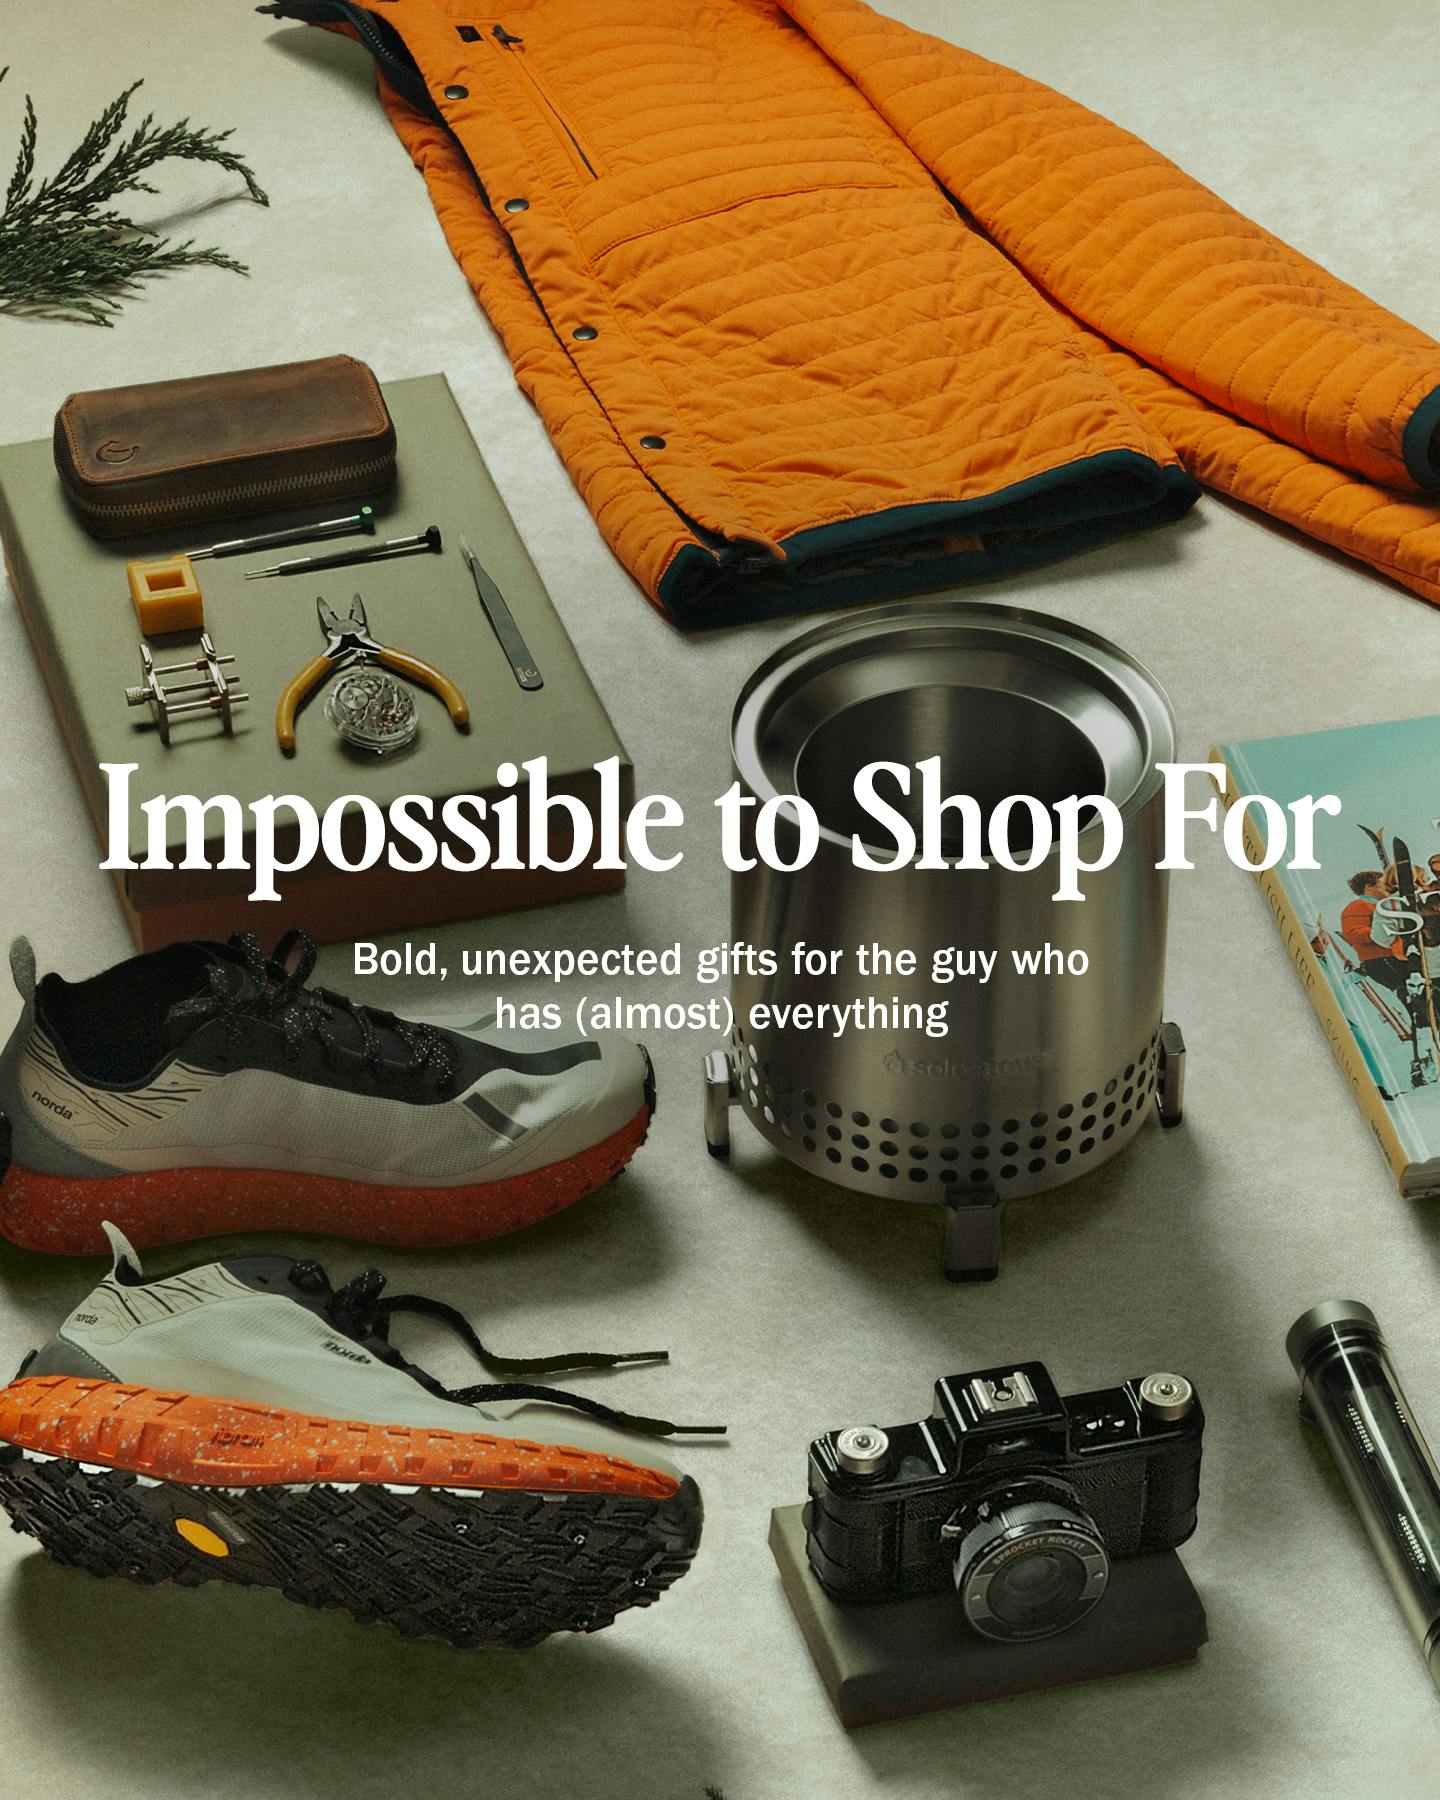 The “Impossible to Shop For” Gift Shop